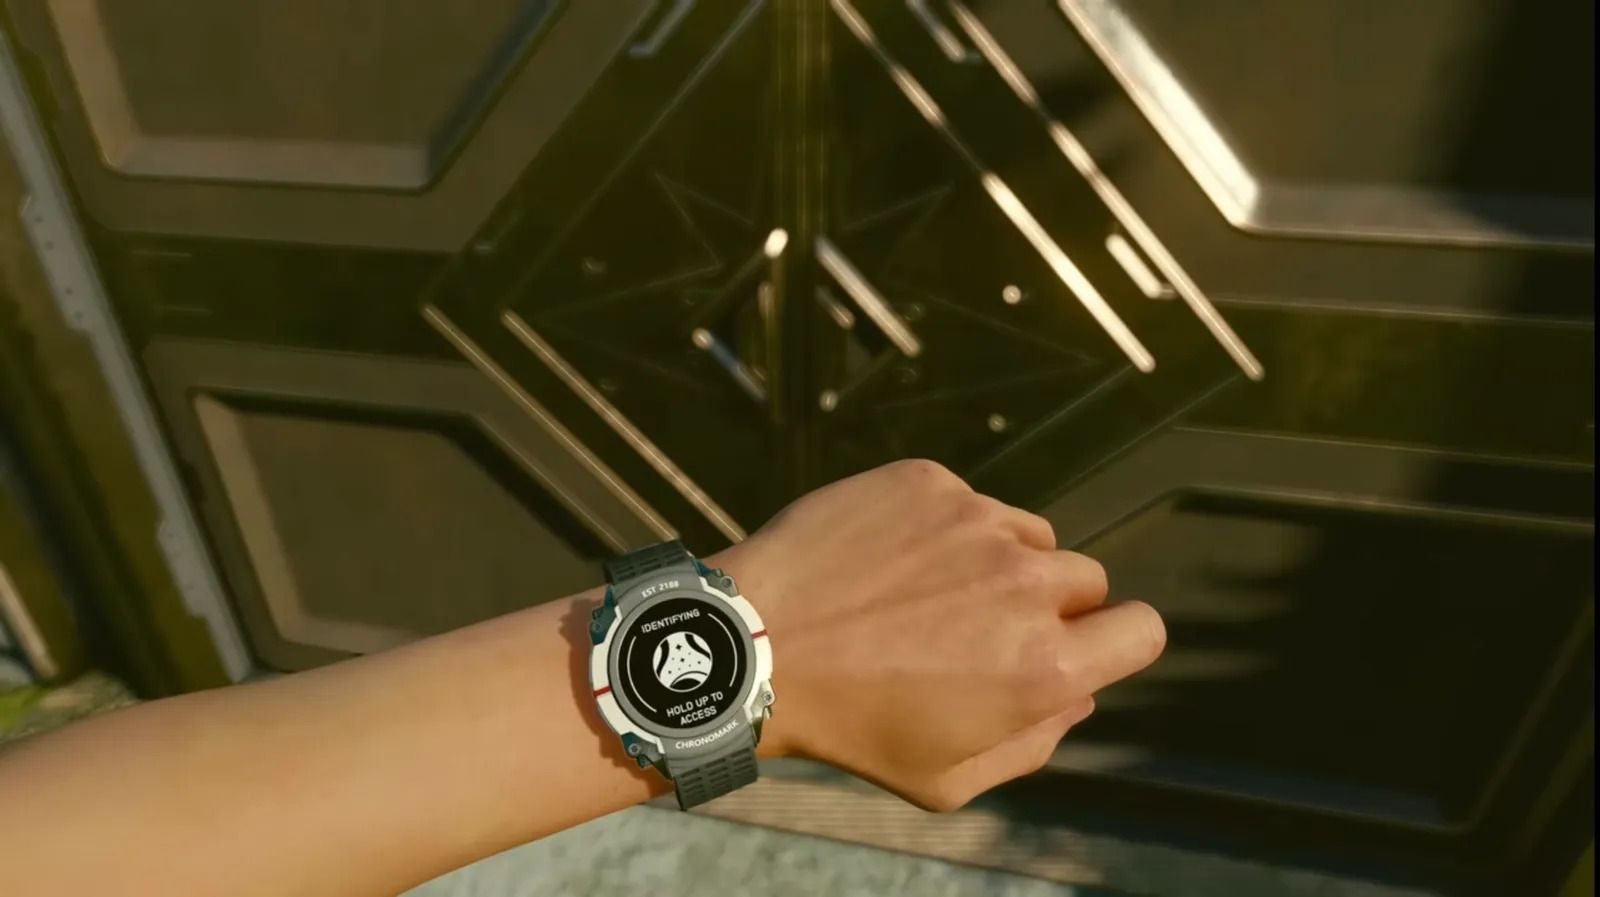 The chronomark watch is shown on the players wrist